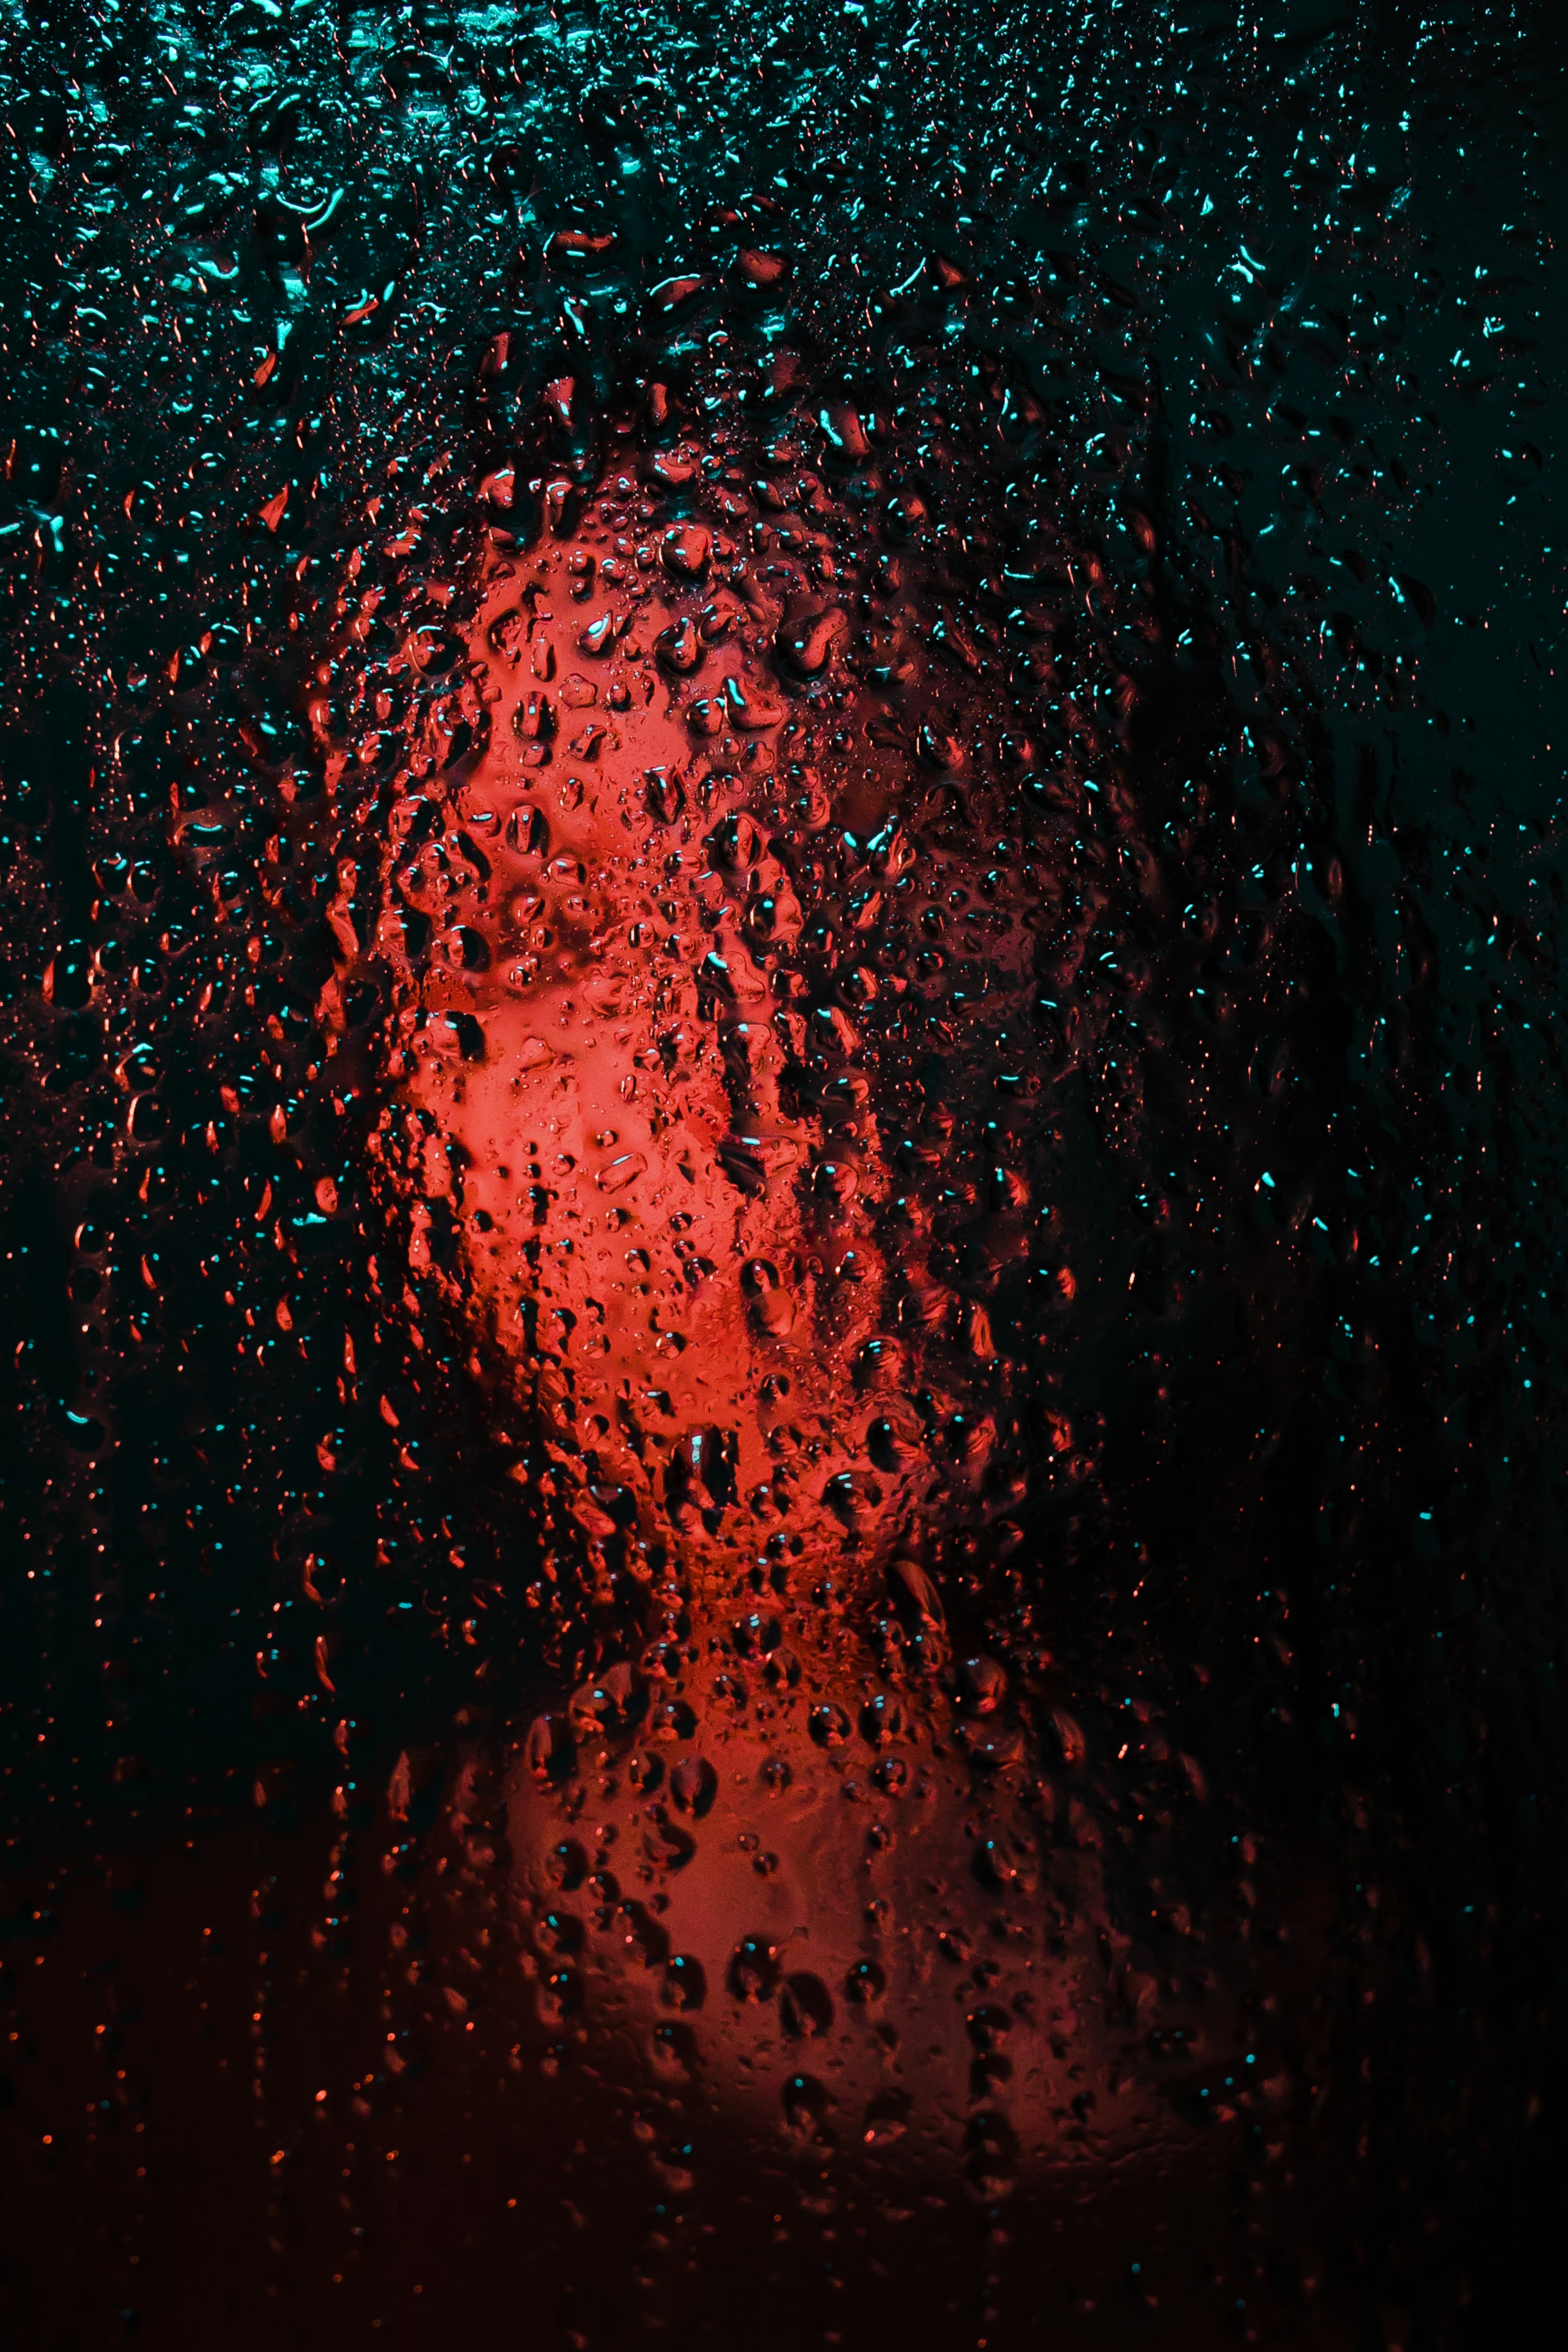 blur, face, drops, silhouette, miscellanea, miscellaneous, wet, smooth, glass phone background